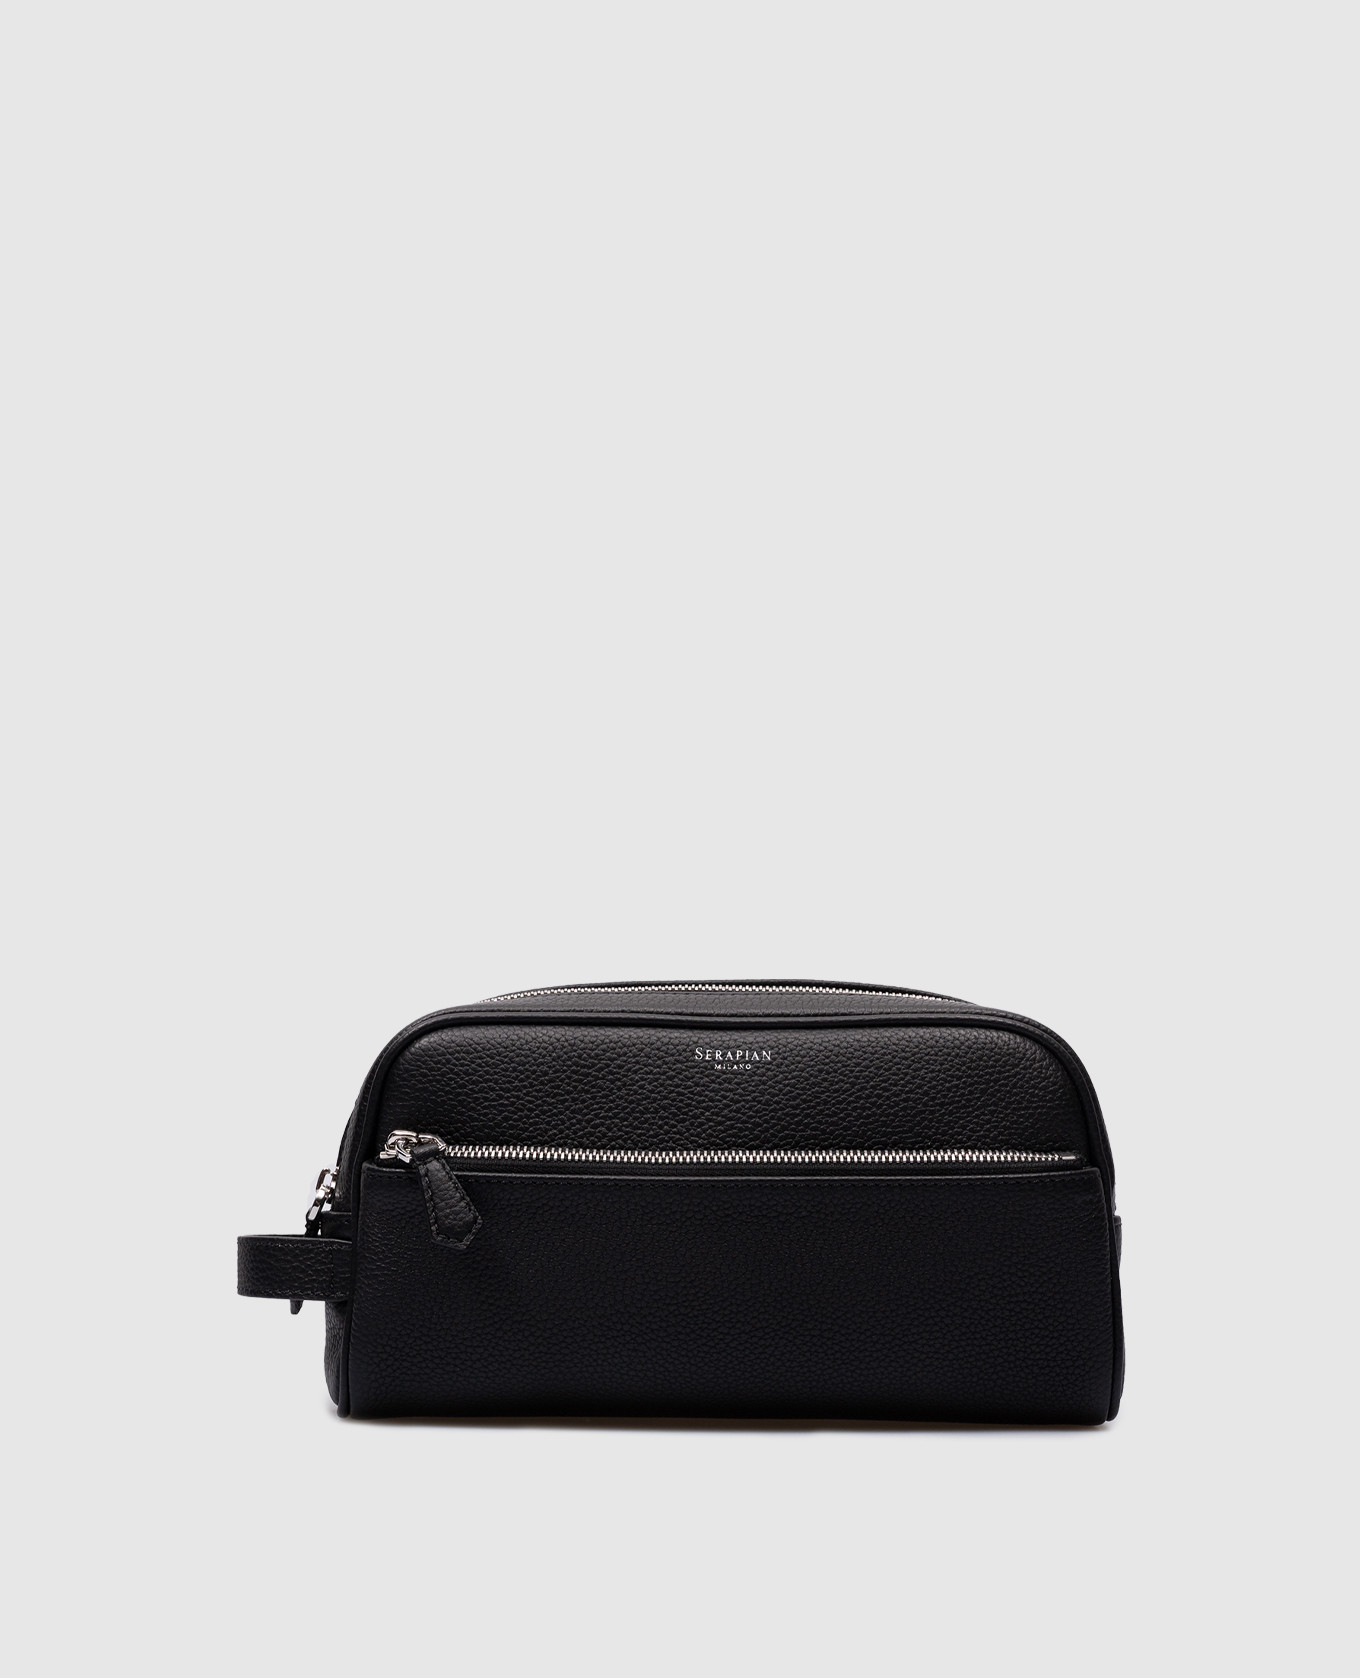 Black leather toiletry bag with logo